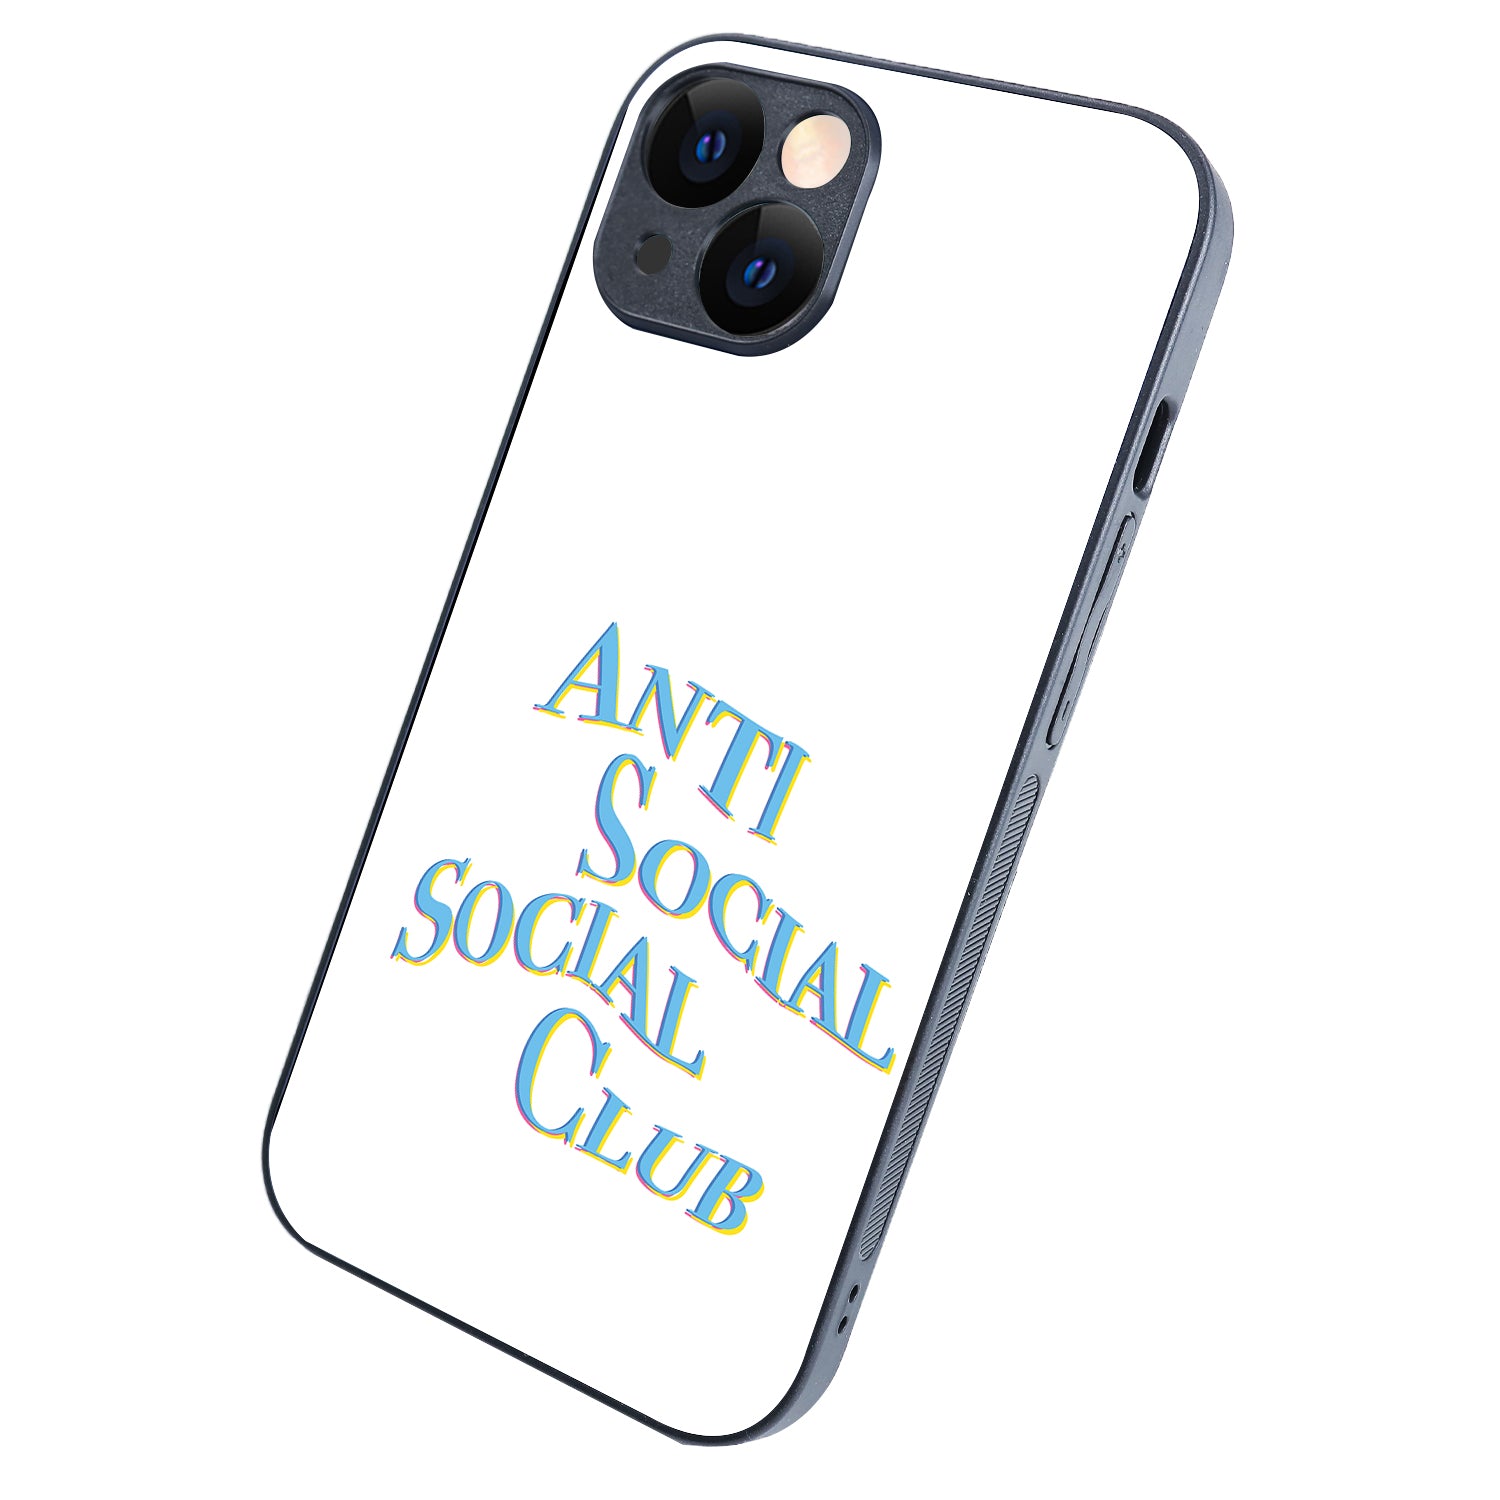 Social Club Motivational Quotes iPhone 14 Case